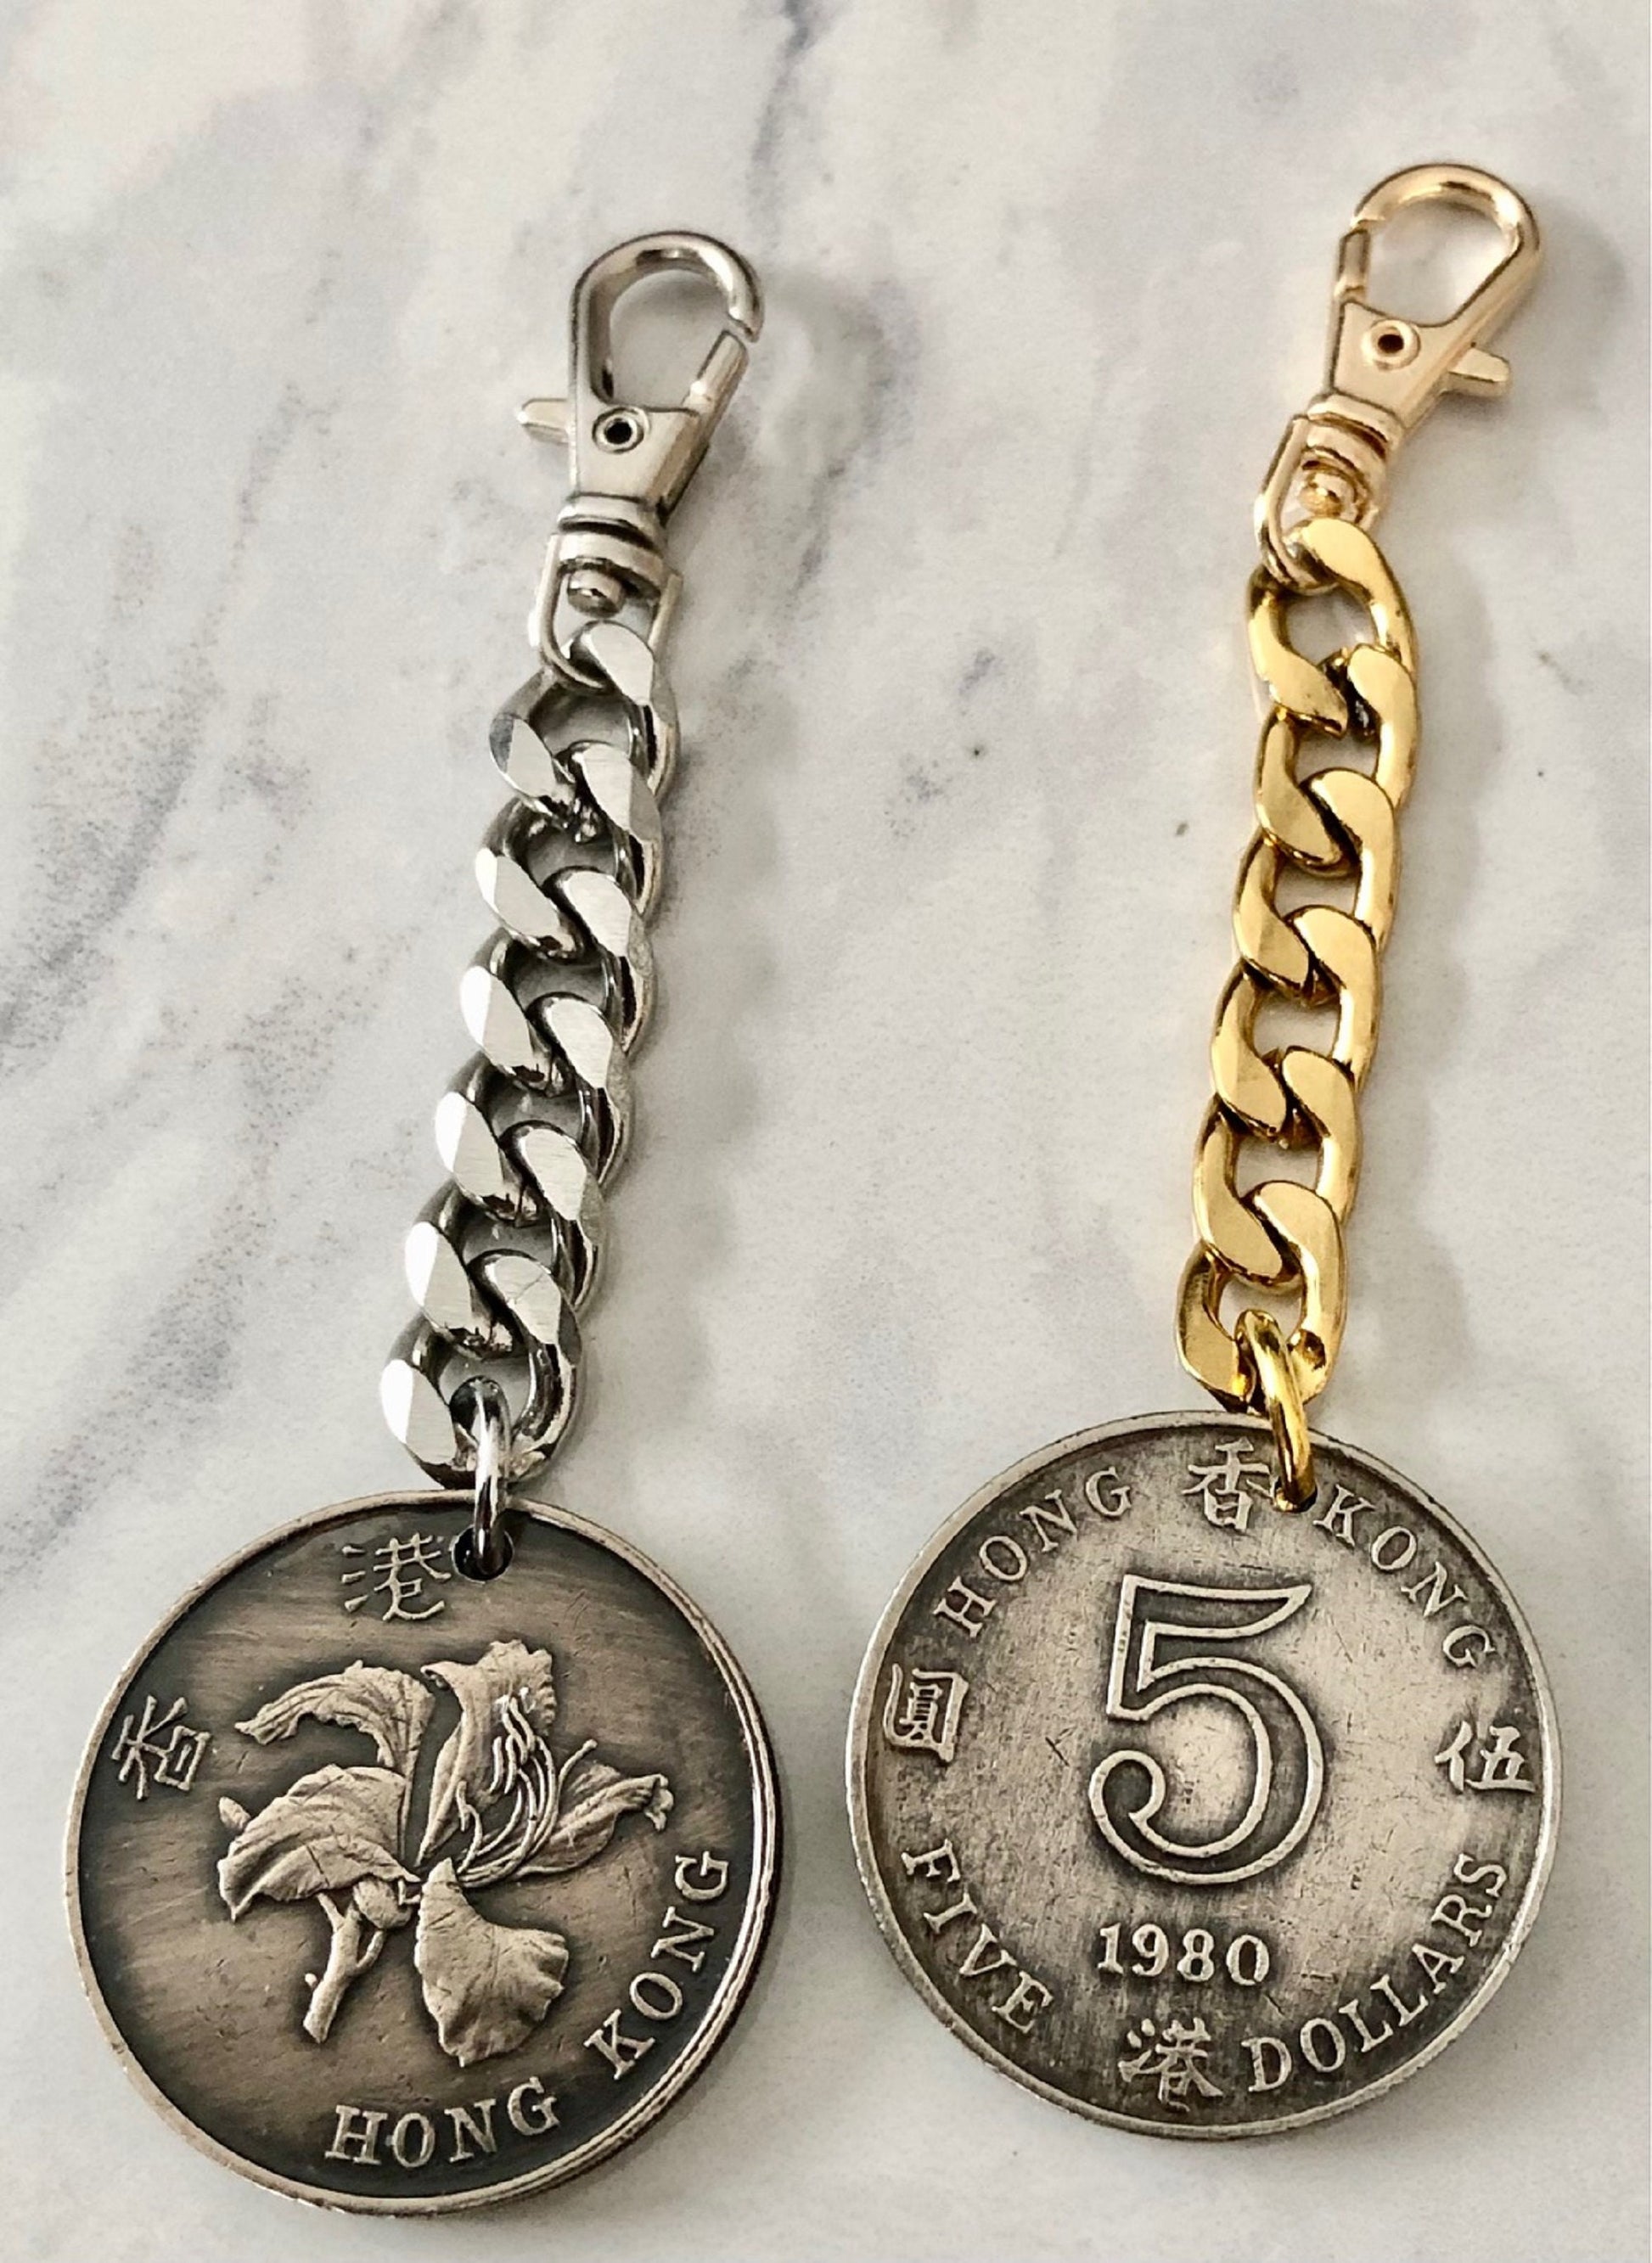 Hong Kong Coin Zipper Pull, China, Chines, Rare, Coin Enthusiast, Jacket, Back Pack, Luggage, Tent, Sleeping Bag, Purse, Clutch